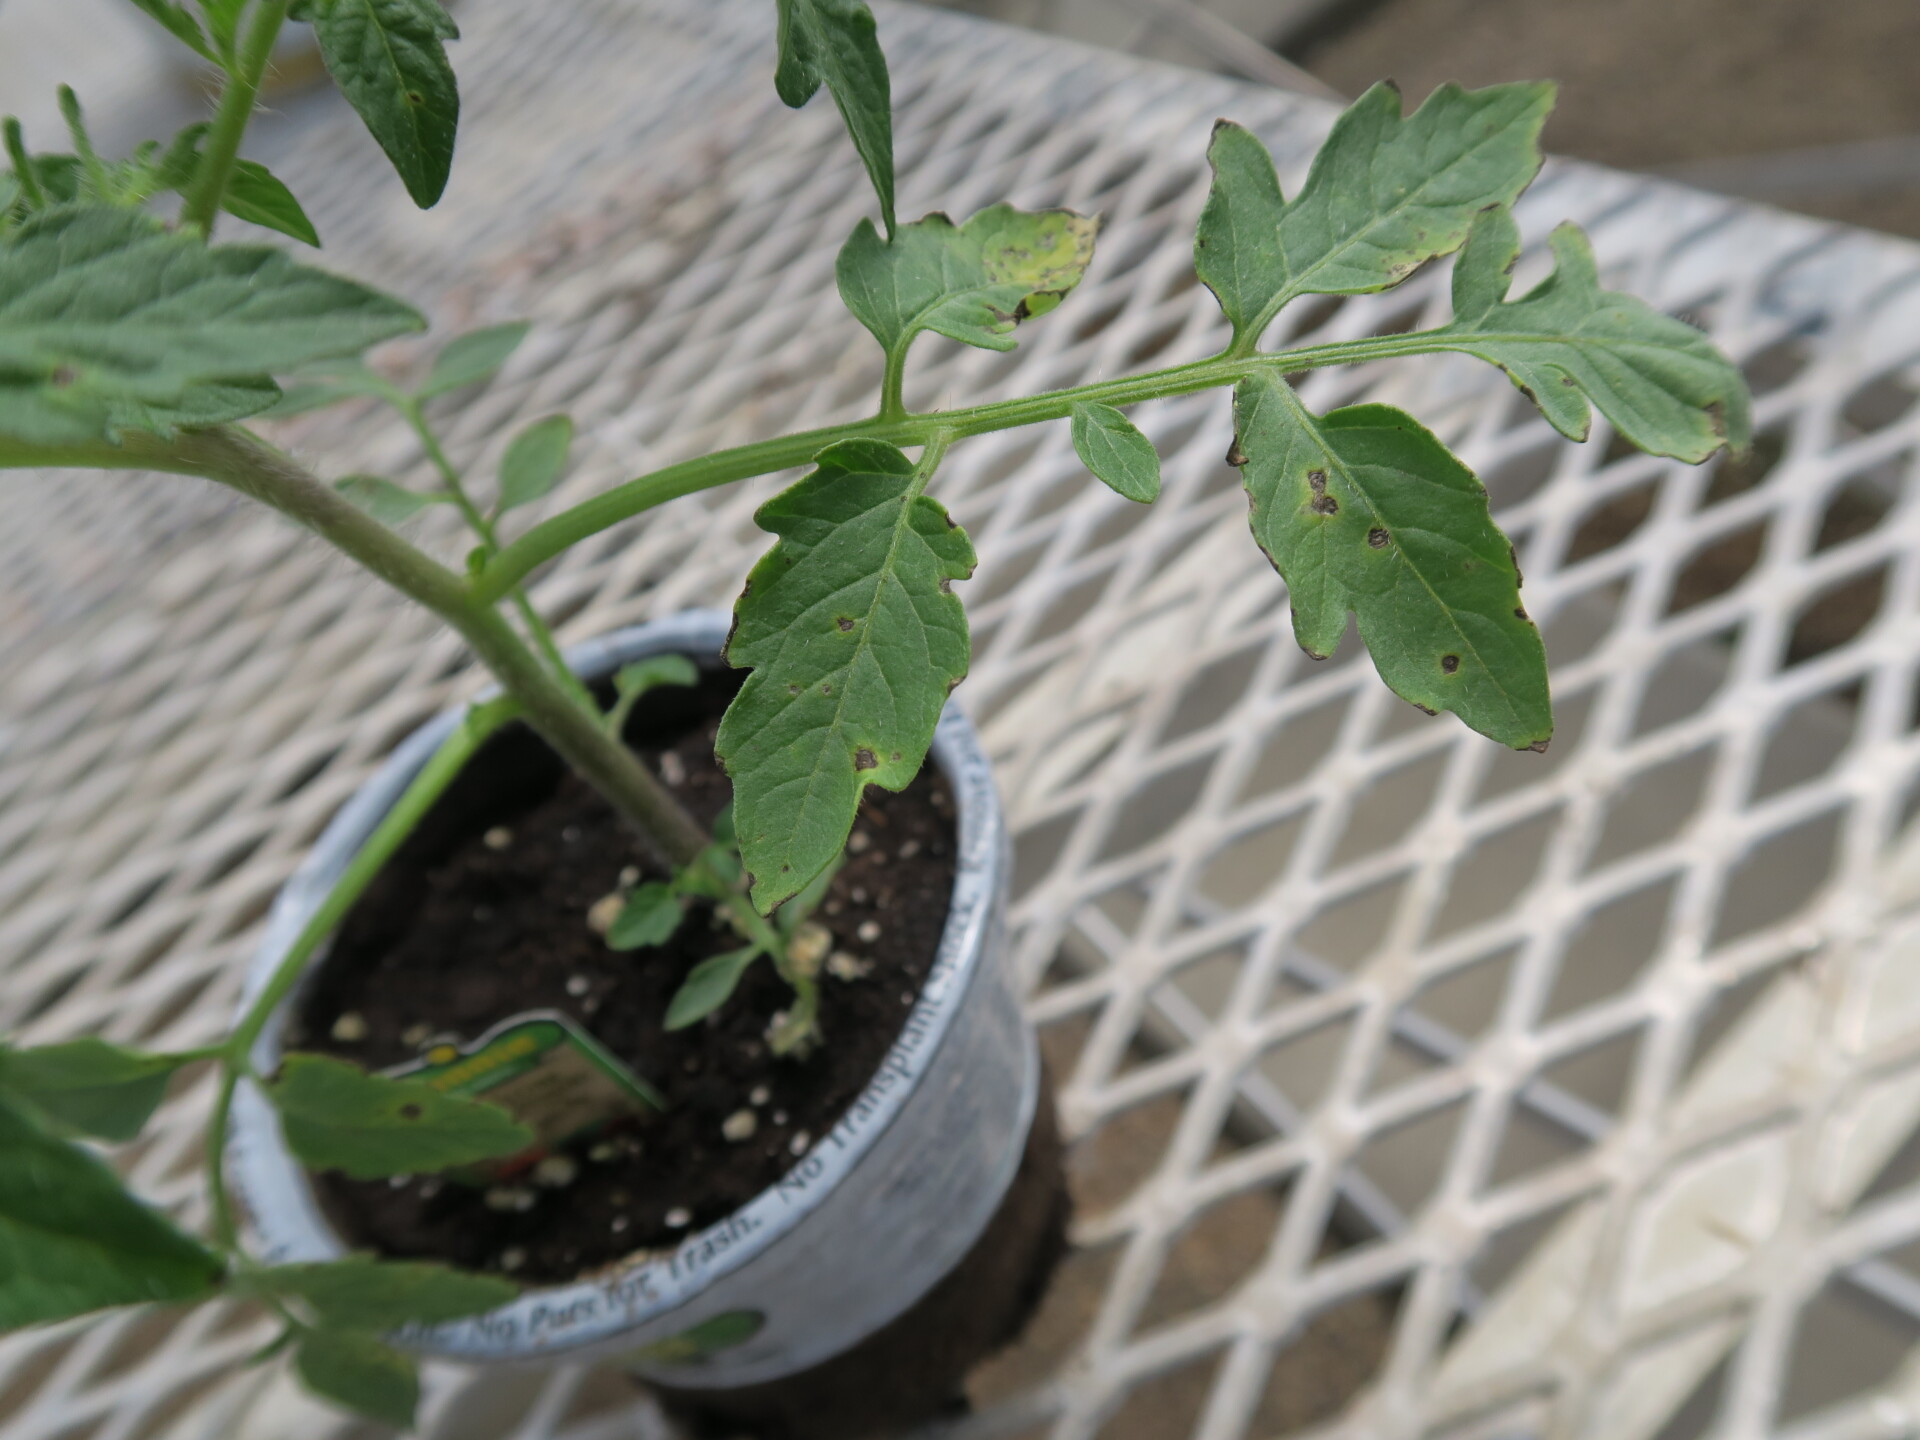  Leaf lesions of bacterial speck on a retail tomato transplant.